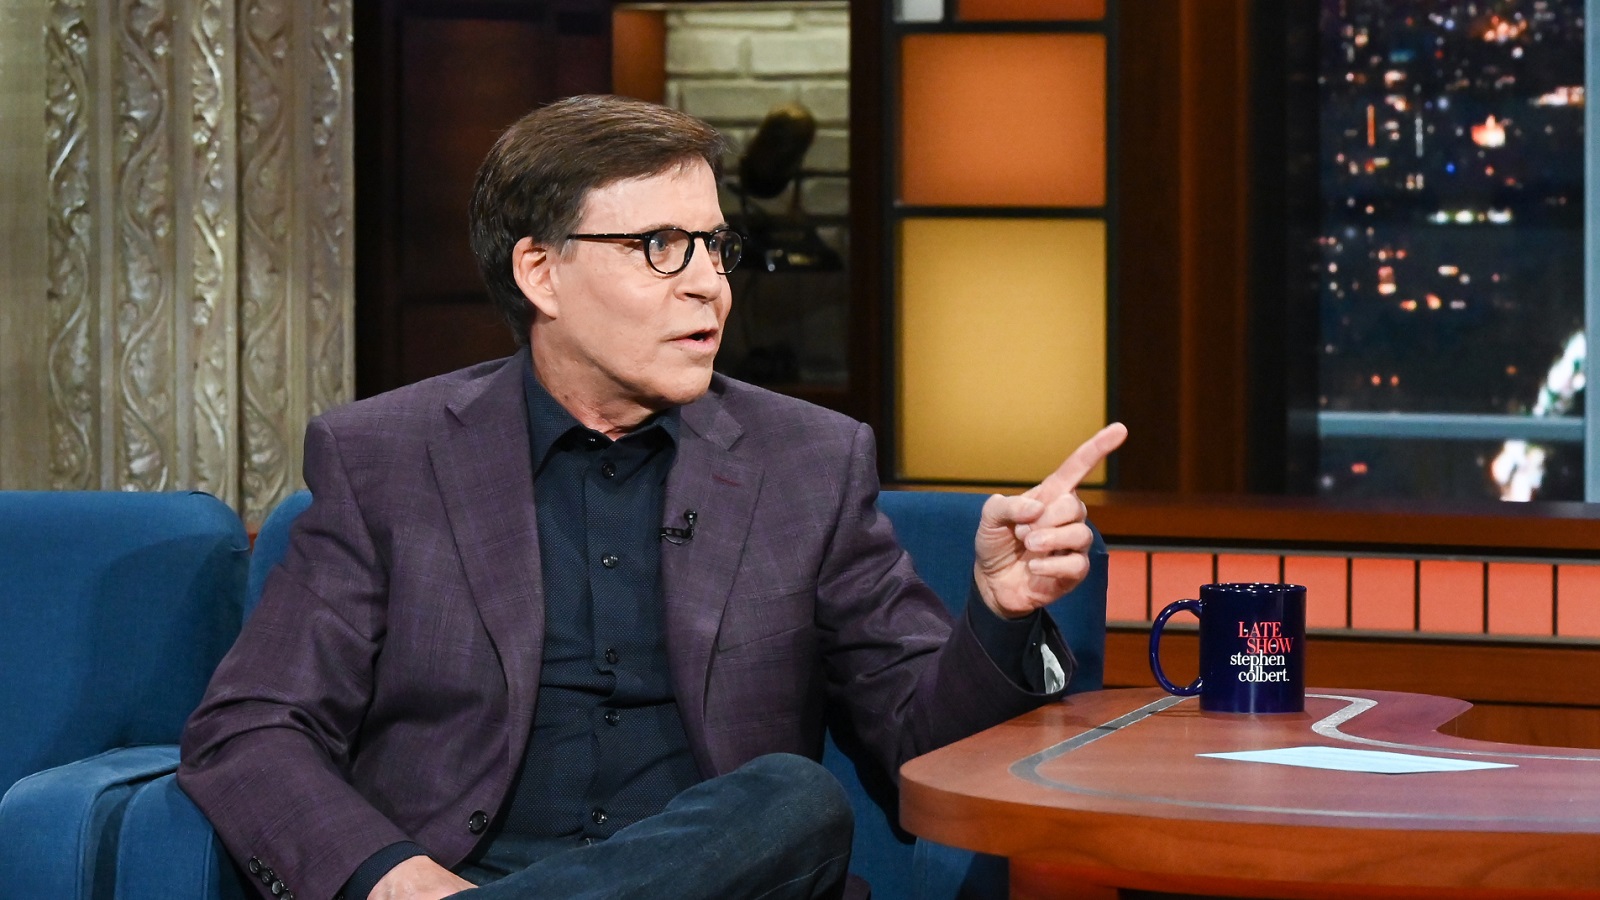 ;The Late Show with Stephen Colbert' and guest Bob Costas during the July 21, 2021 airing. | Scott Kowalchyk/CBS via Getty Images